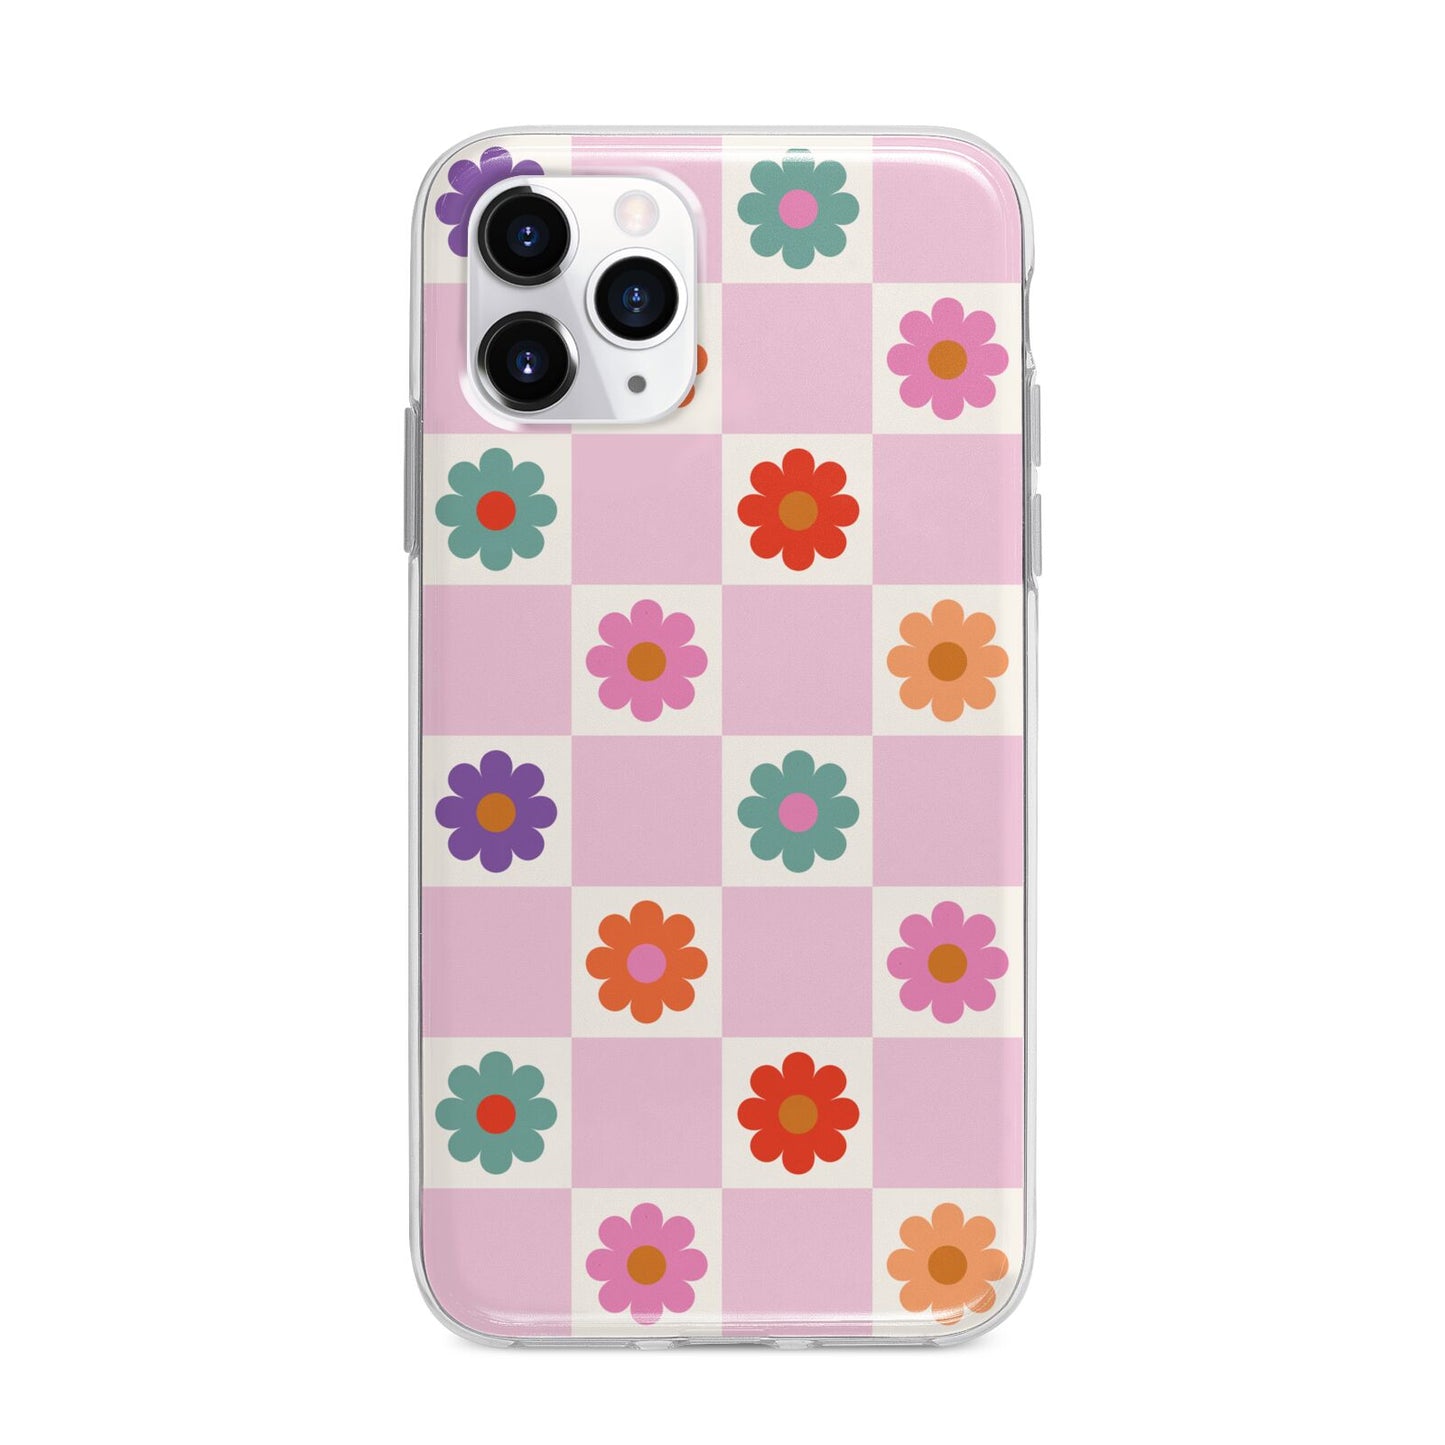 Checked flowers Apple iPhone 11 Pro Max in Silver with Bumper Case